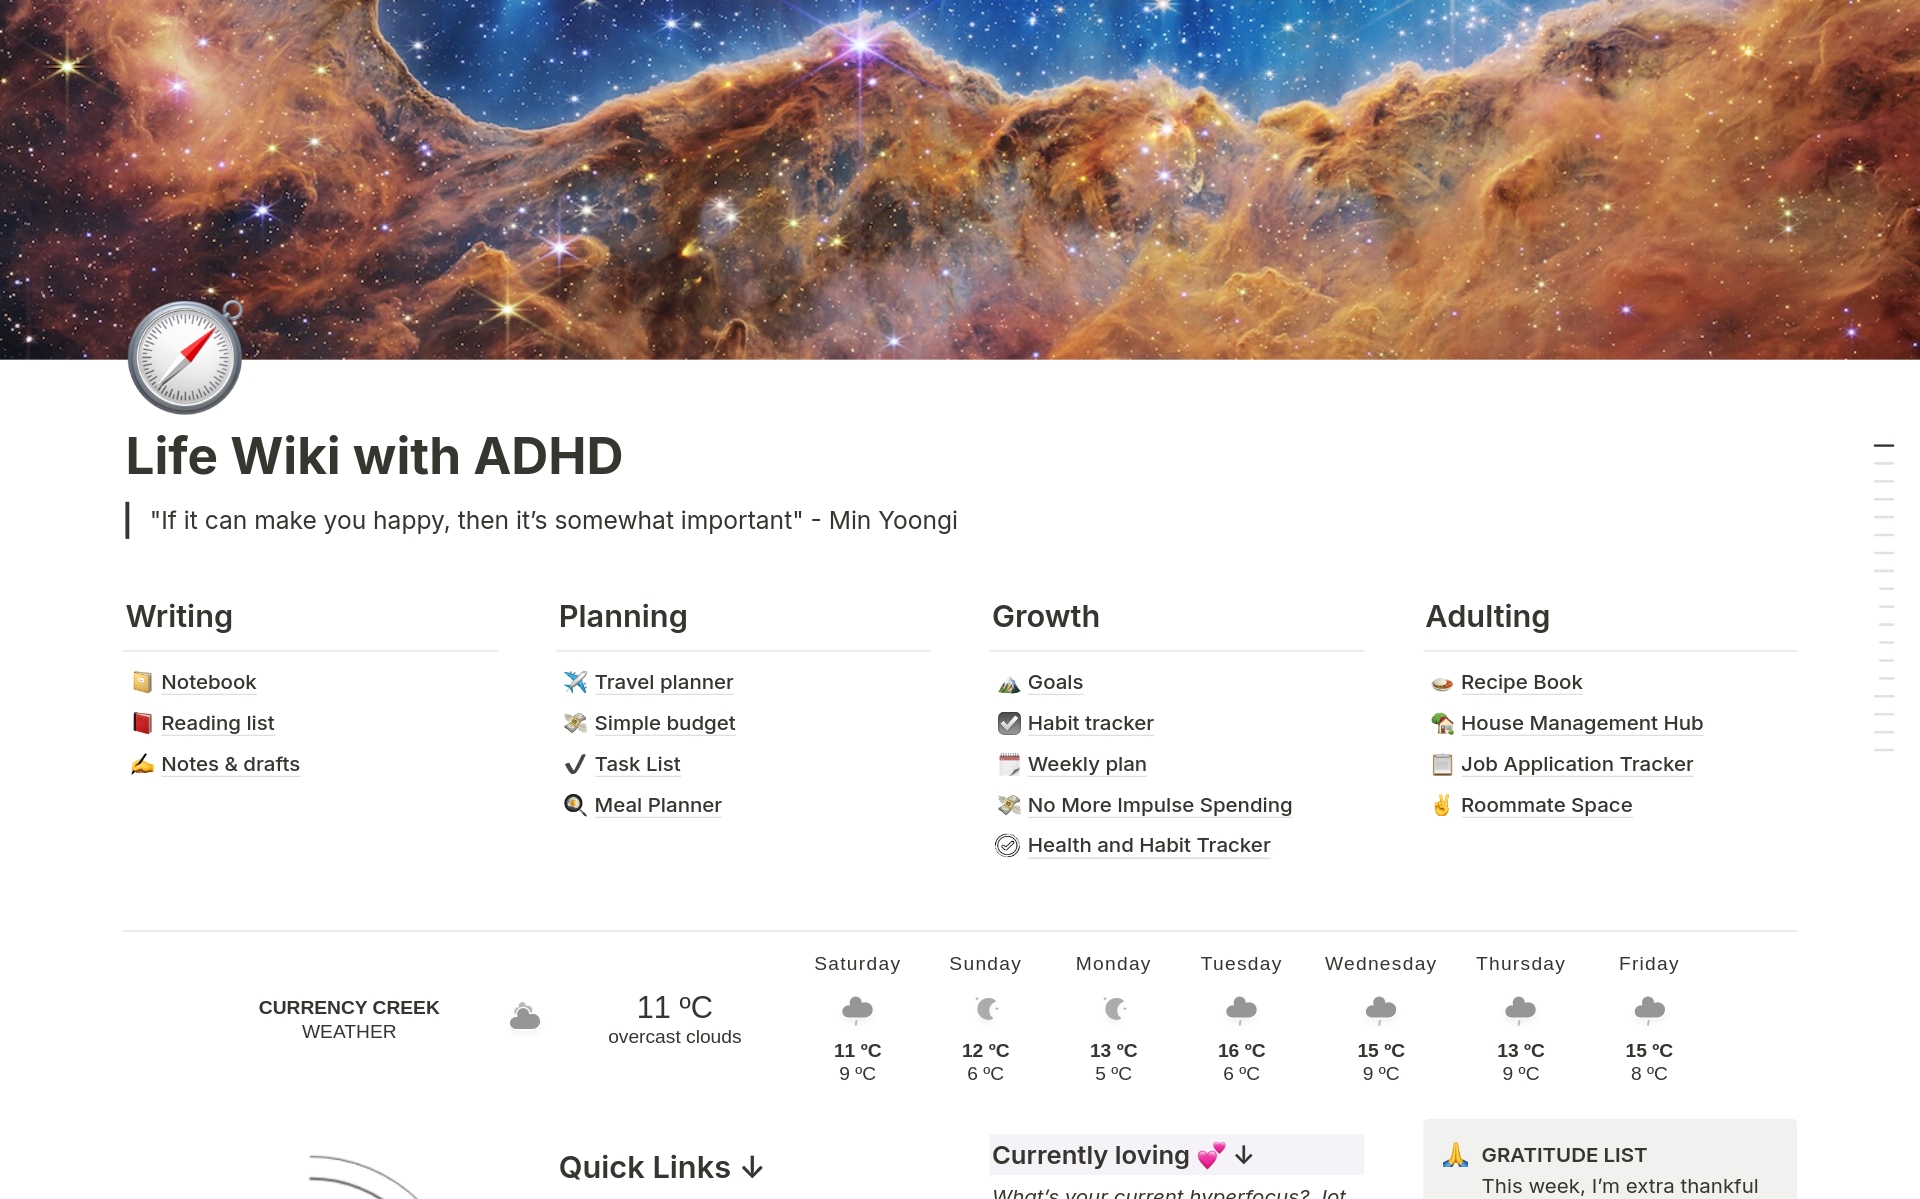 A comprehensive template designed to organize various aspects of life for individuals with ADHD.
This template a versatile tool aimed at enhancing daily productivity and well-being, tailored specifically for those with ADHD.